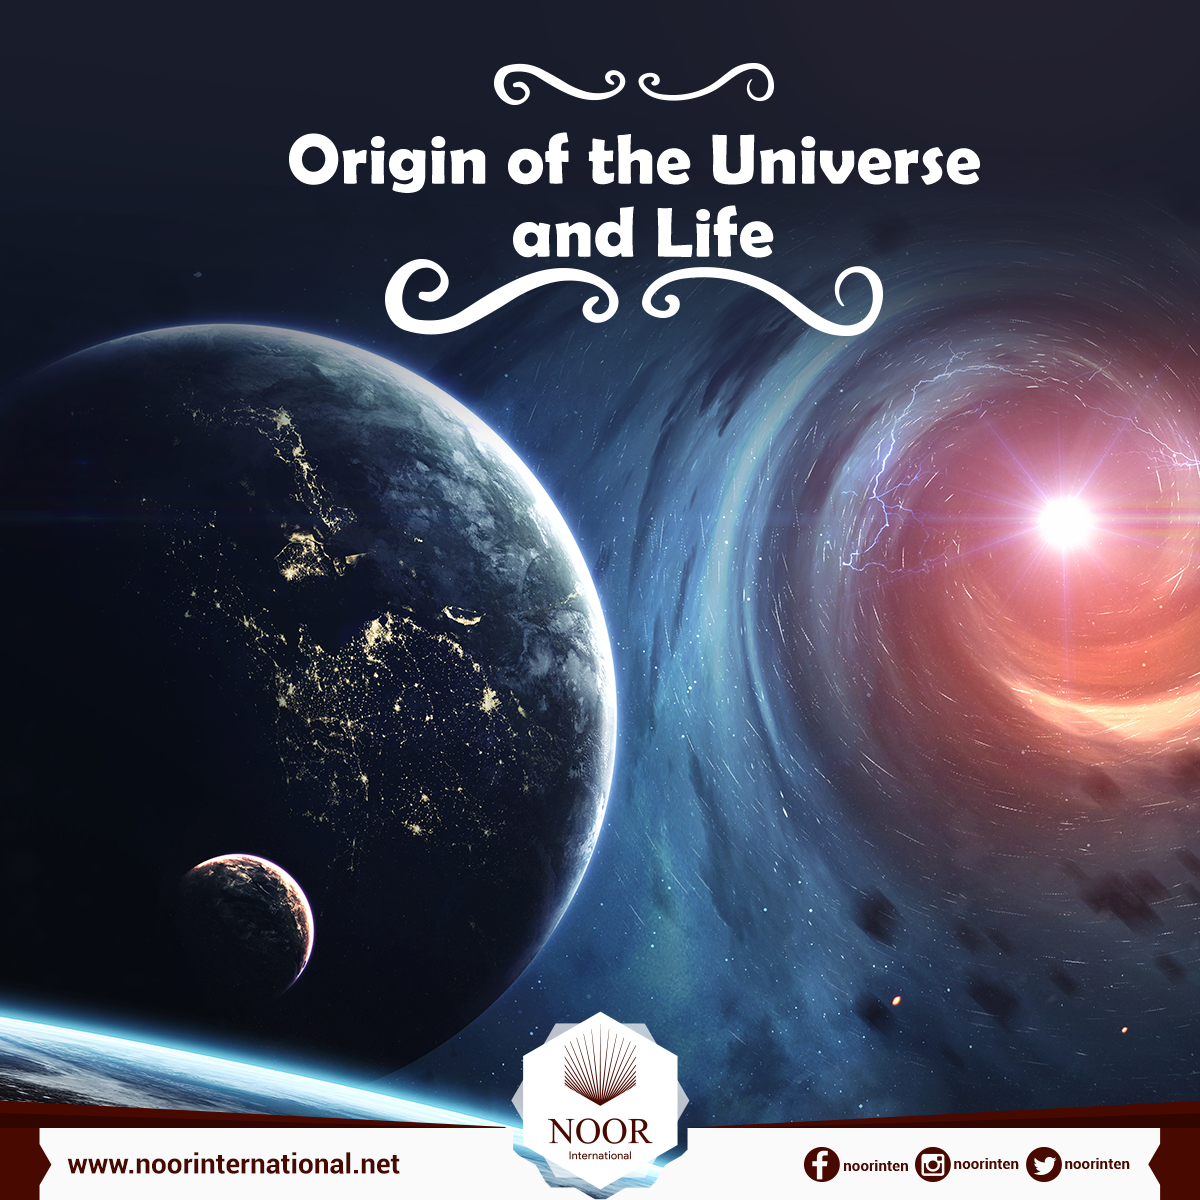 Origin of the Universe and Life